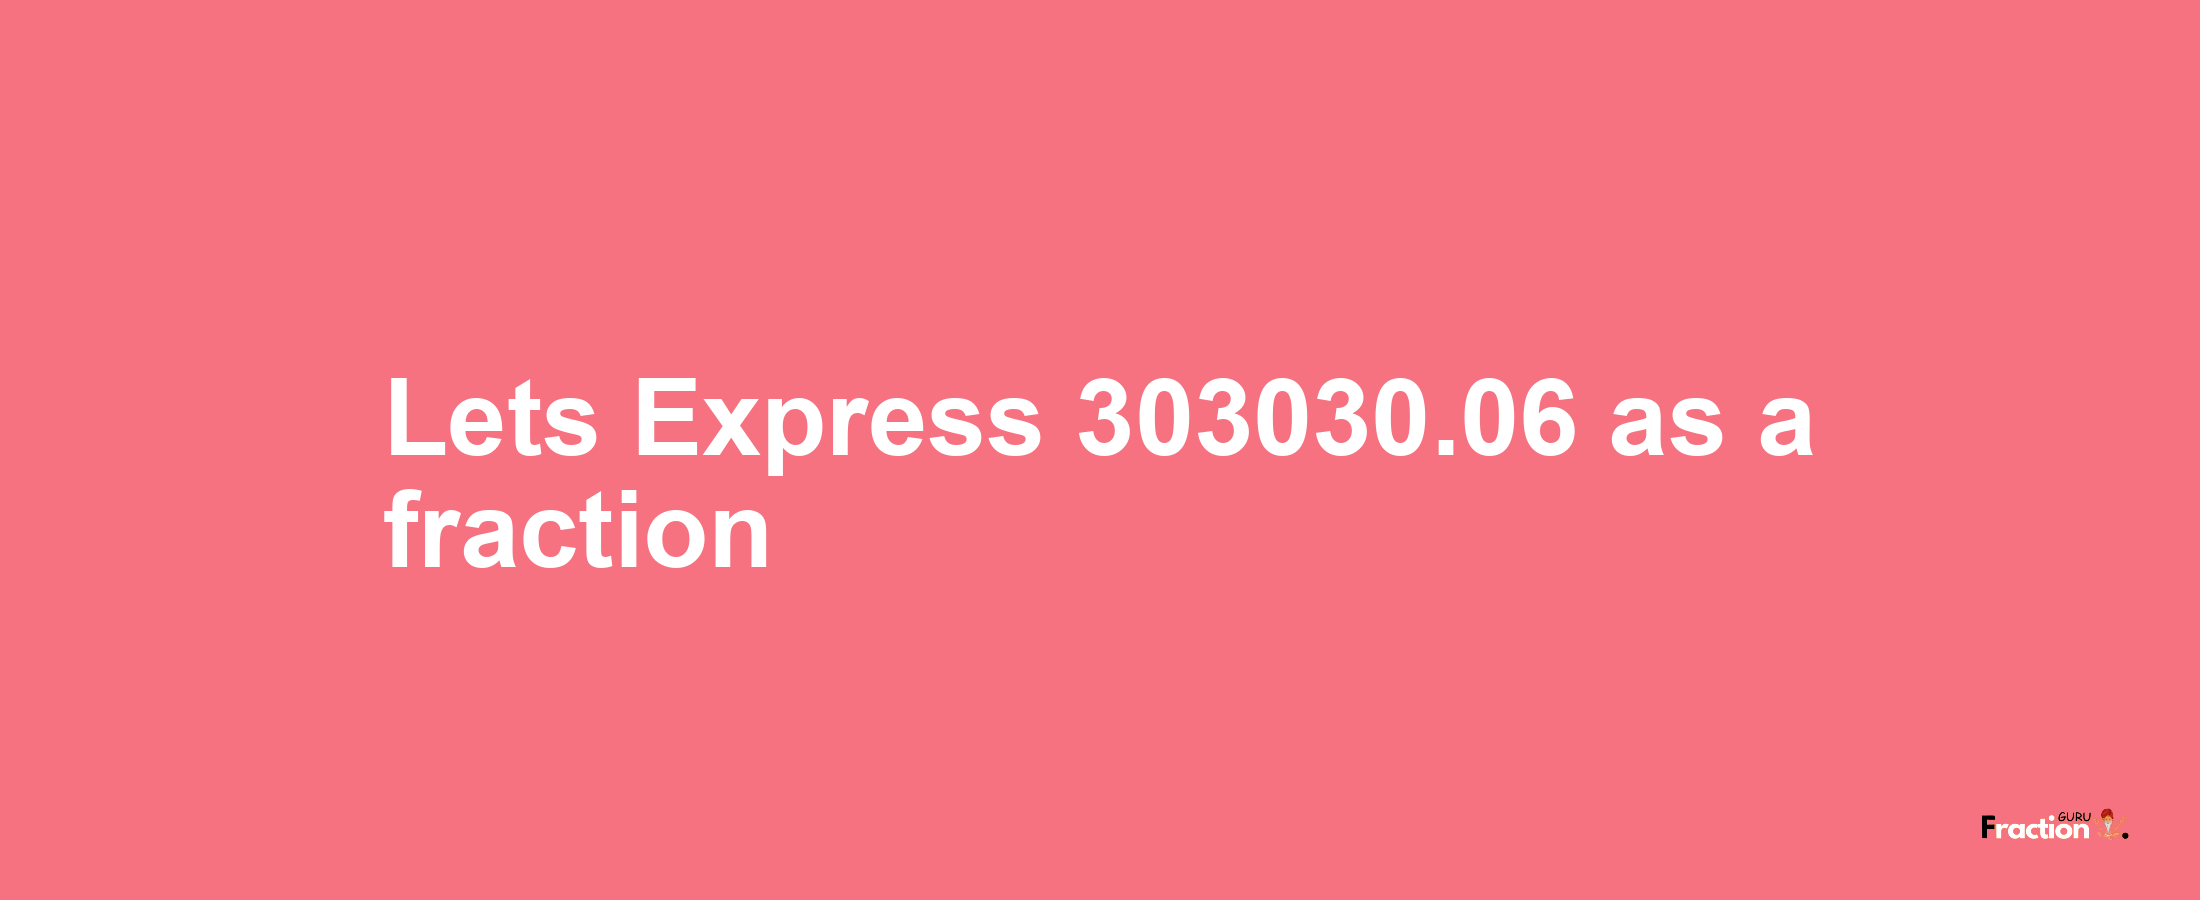 Lets Express 303030.06 as afraction